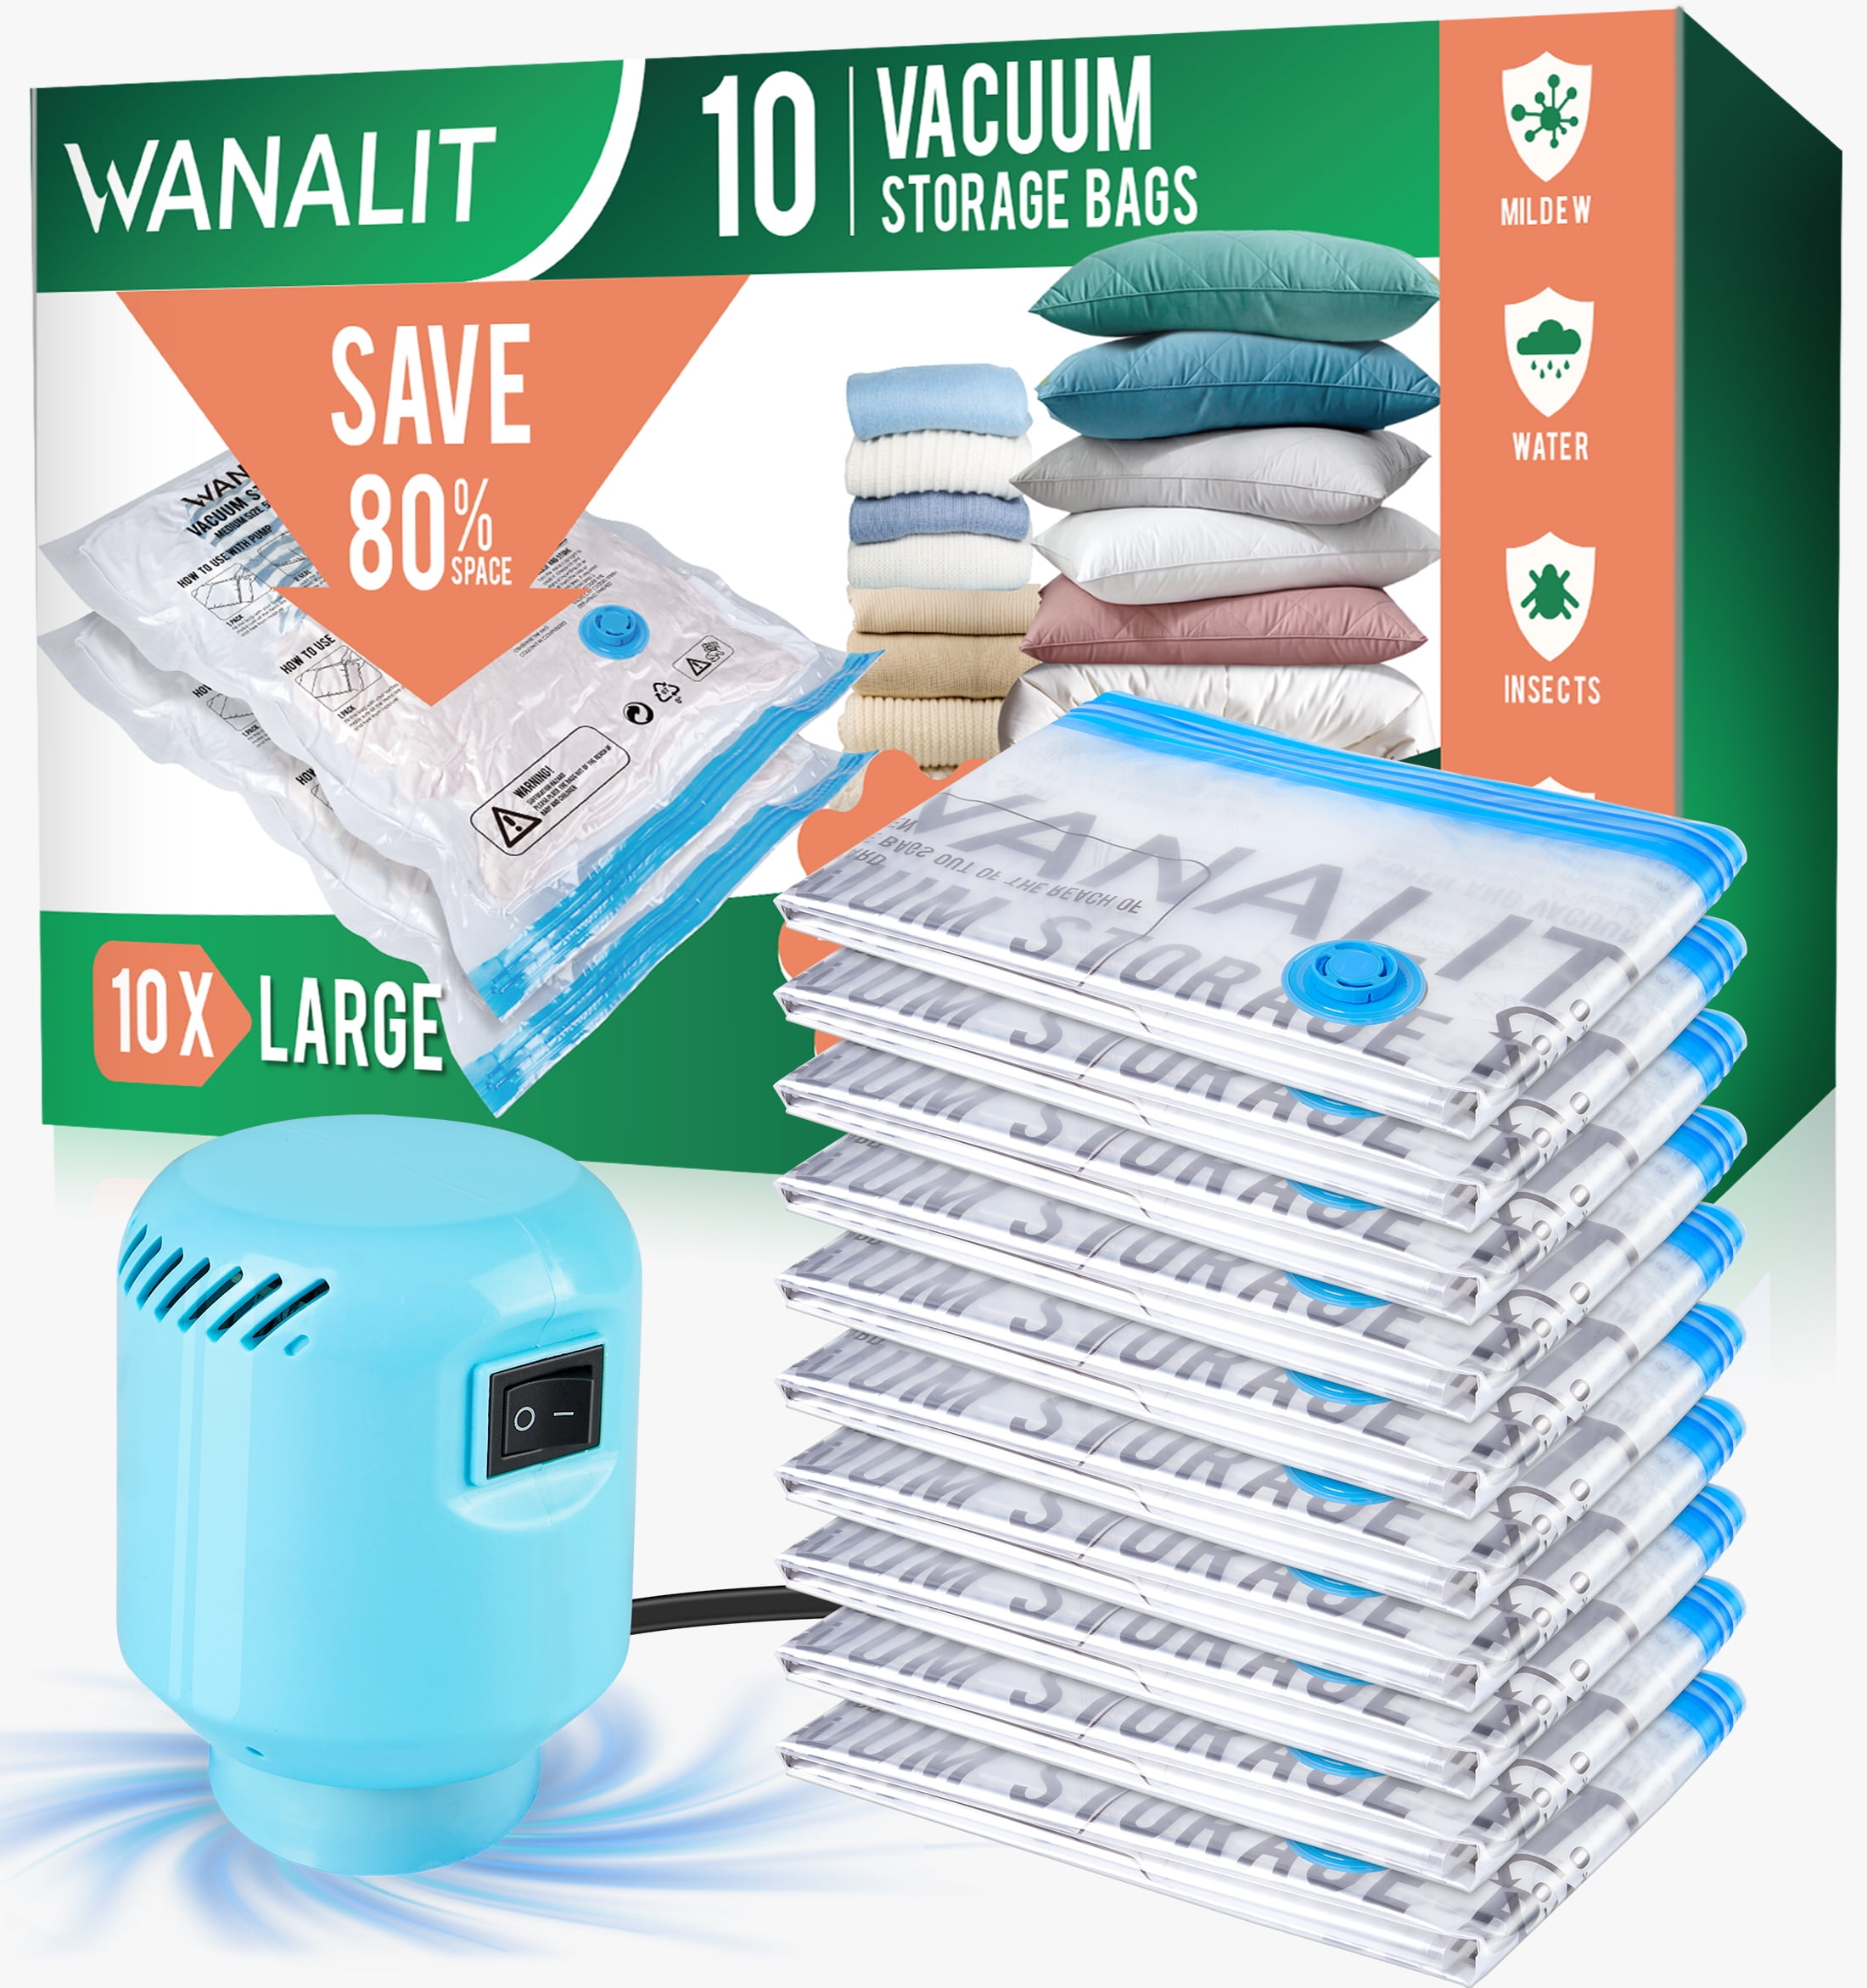  12 Combo Vacuum Storage Bags (3 Jumbo/3 Large/3 Medium/3 Small),  Space Saver Bags Vacuum Seal Bags with Pump, Space Bags, Vacuum Sealer Bags  for Clothes, Comforters, Blankets, Bedding : Home & Kitchen